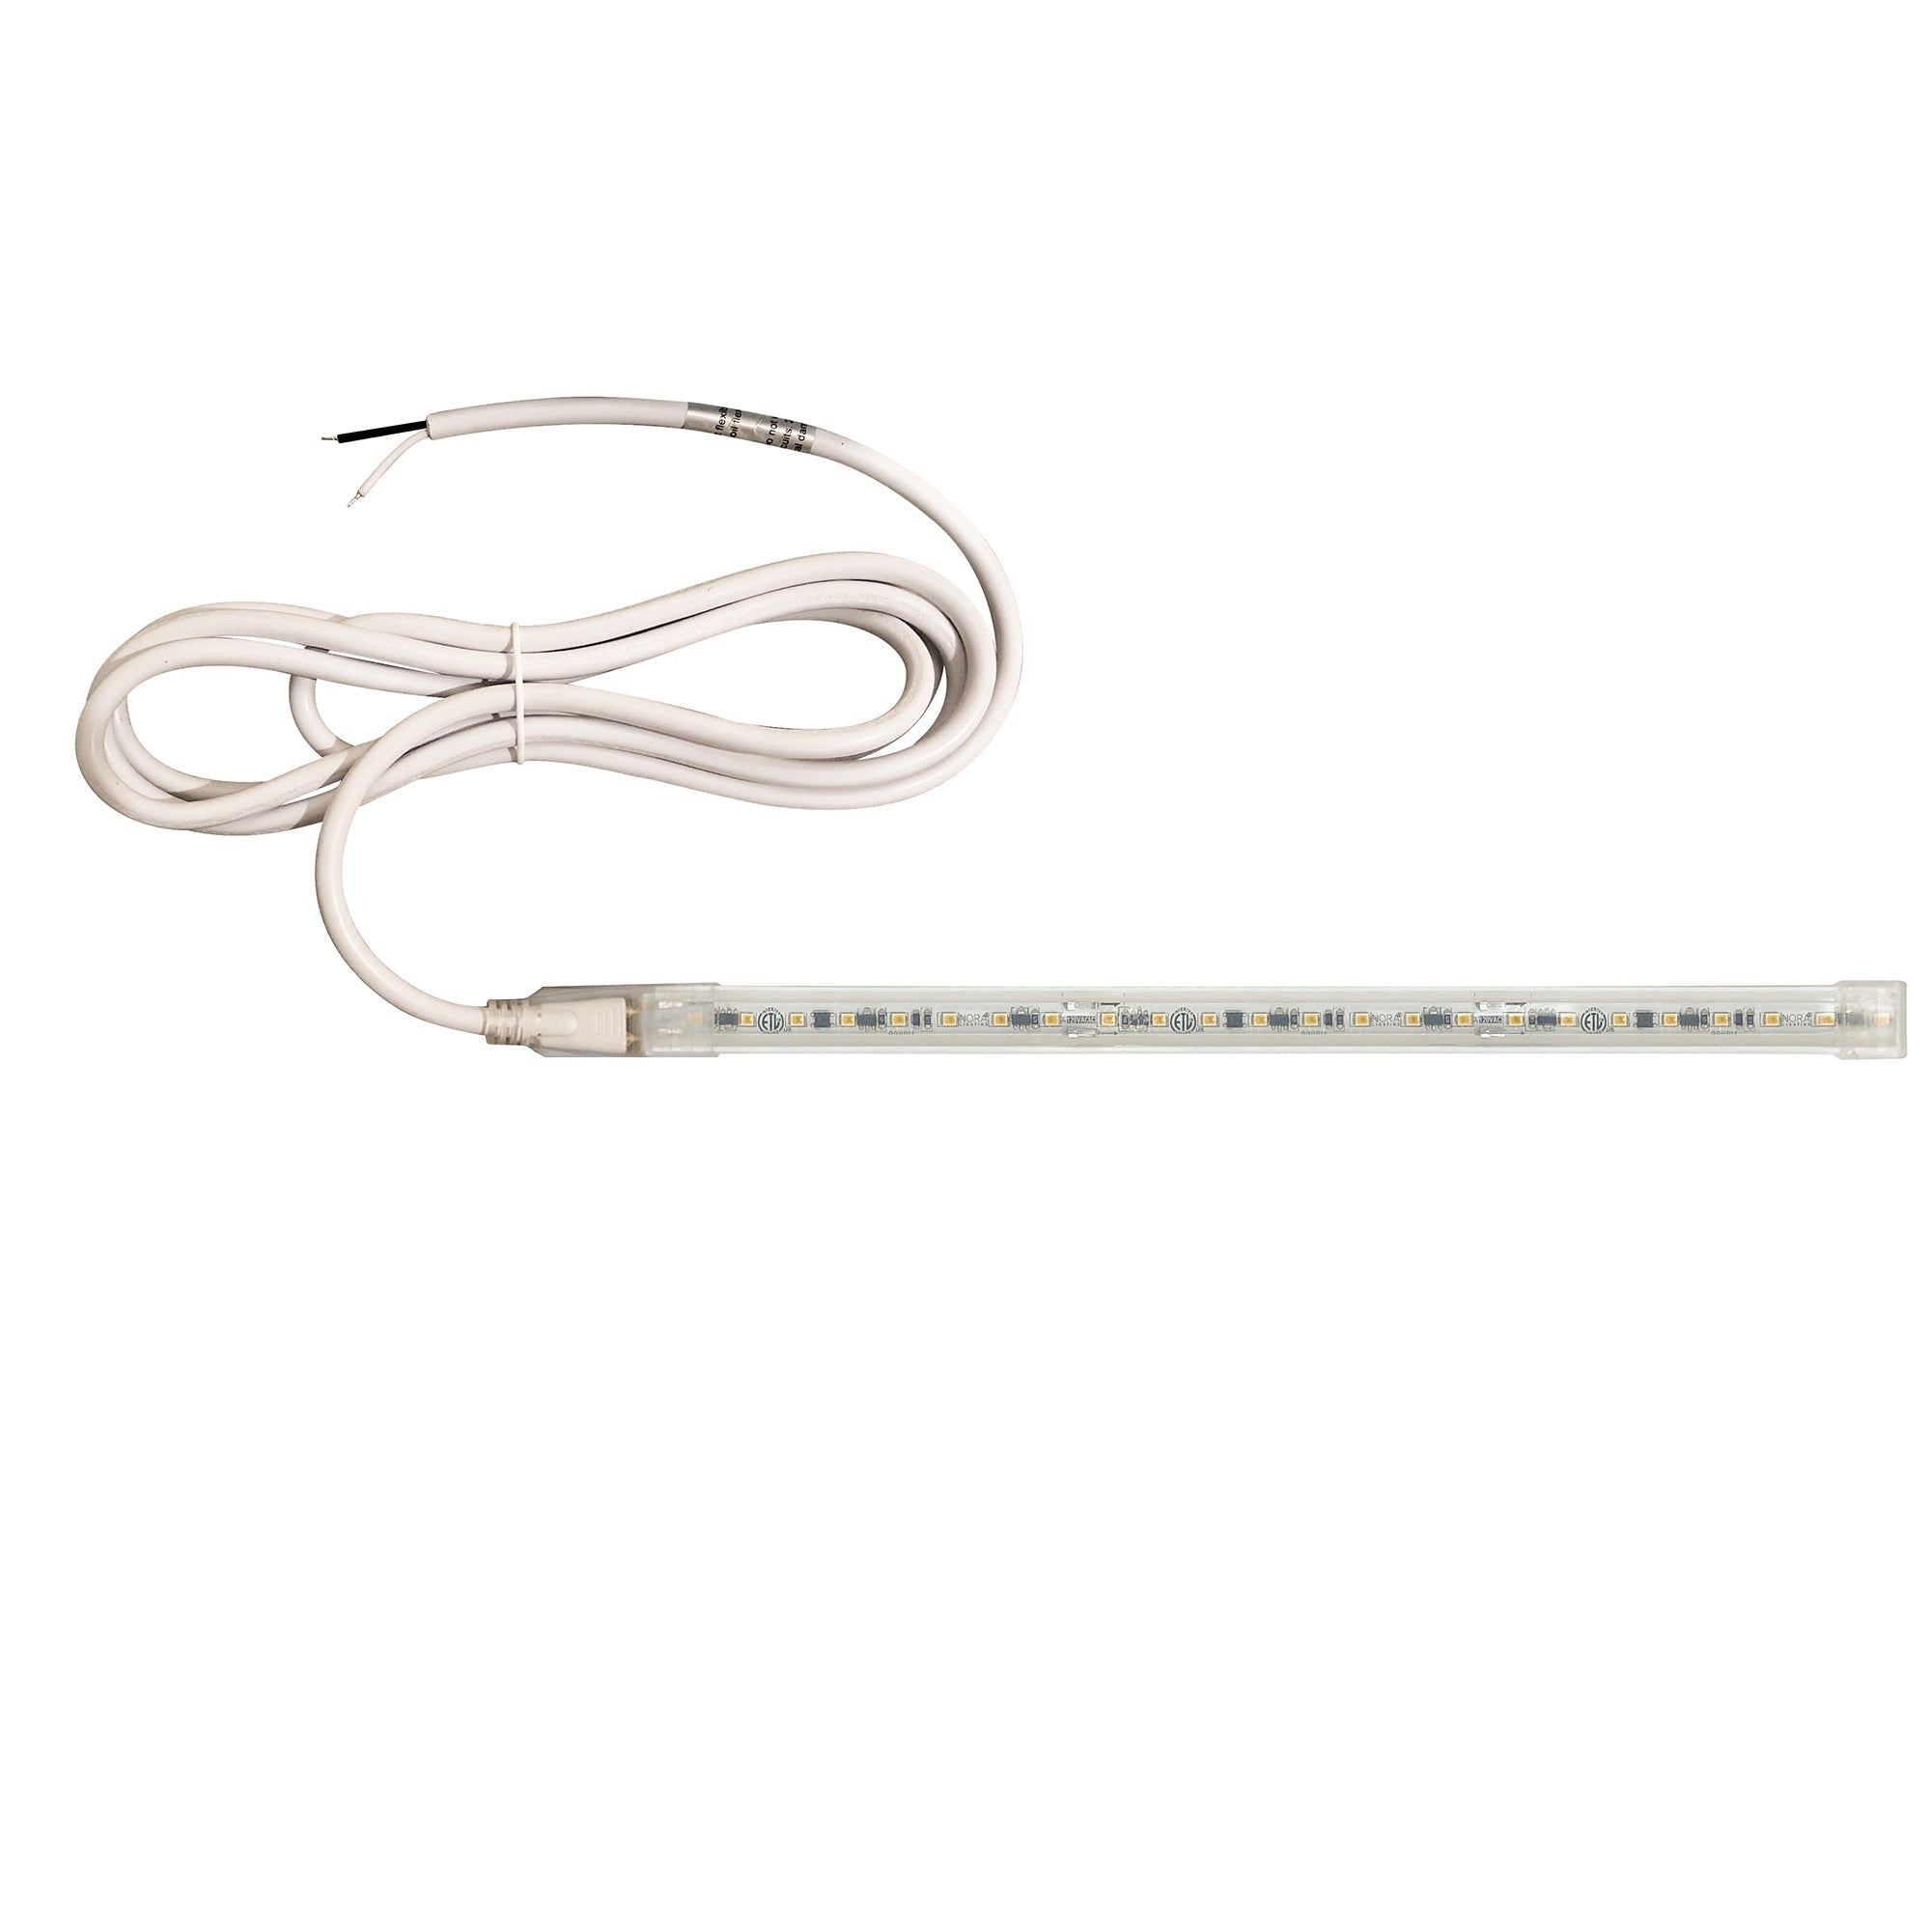 Nora Lighting NUTP13-W45-12-930/HW - Accent / Undercabinet - Custom Cut 45-ft 120V Continuous LED Tape Light, 330lm / 3.6W per foot, 3000K, w/ Mounting Clips and 8' Hardwired Power Cord